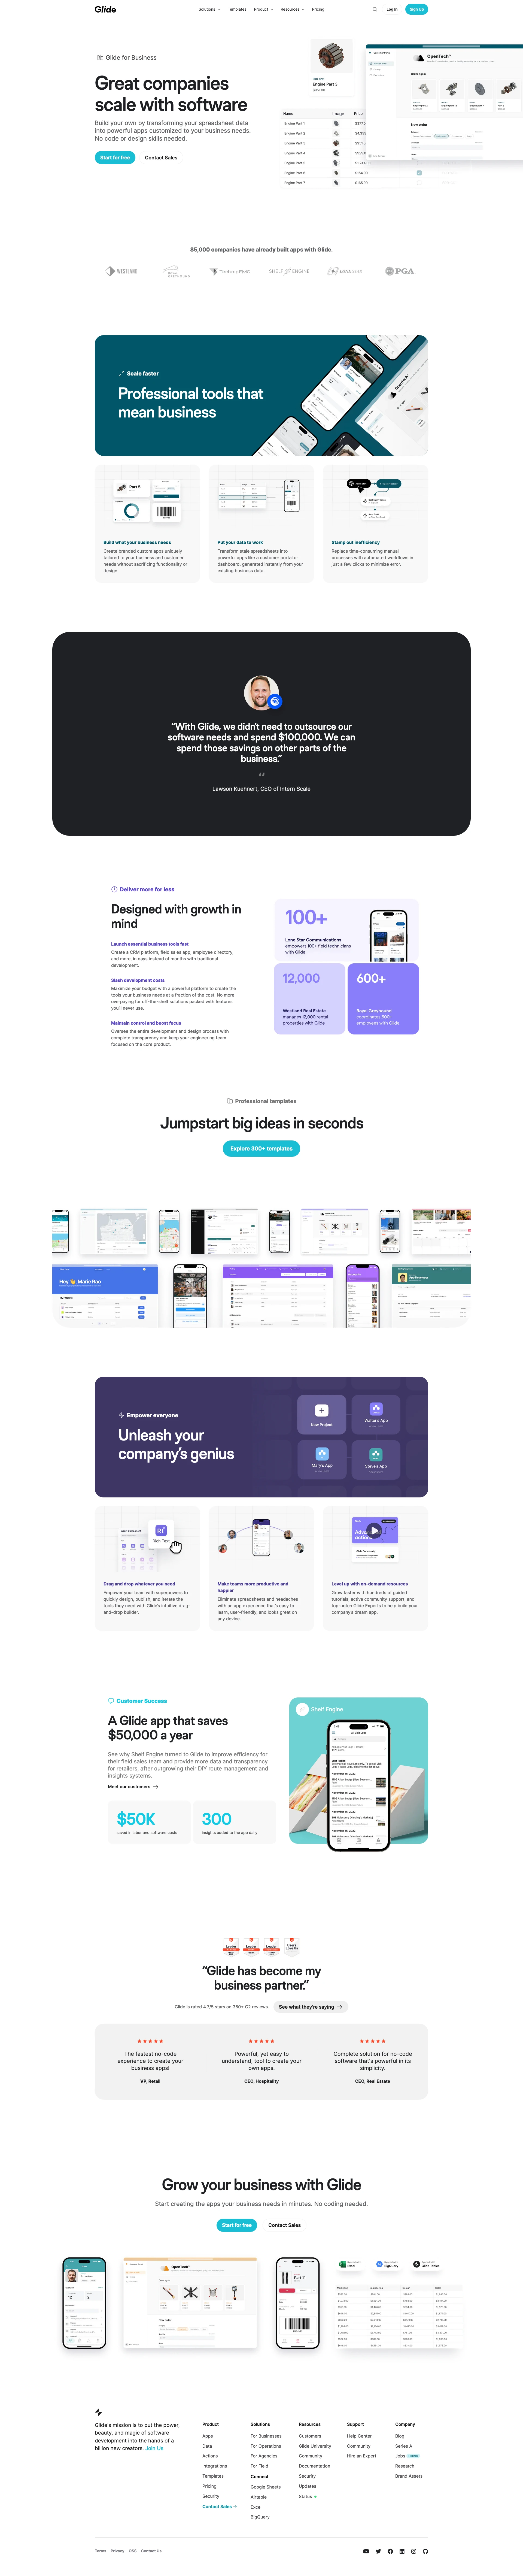 Glide Landing Page Example: Build AI-powered apps with Glide, the leading no-code platform for app development. Glide makes it easy to build and deploy custom tools your business needs and team will love — with clicks, not code.